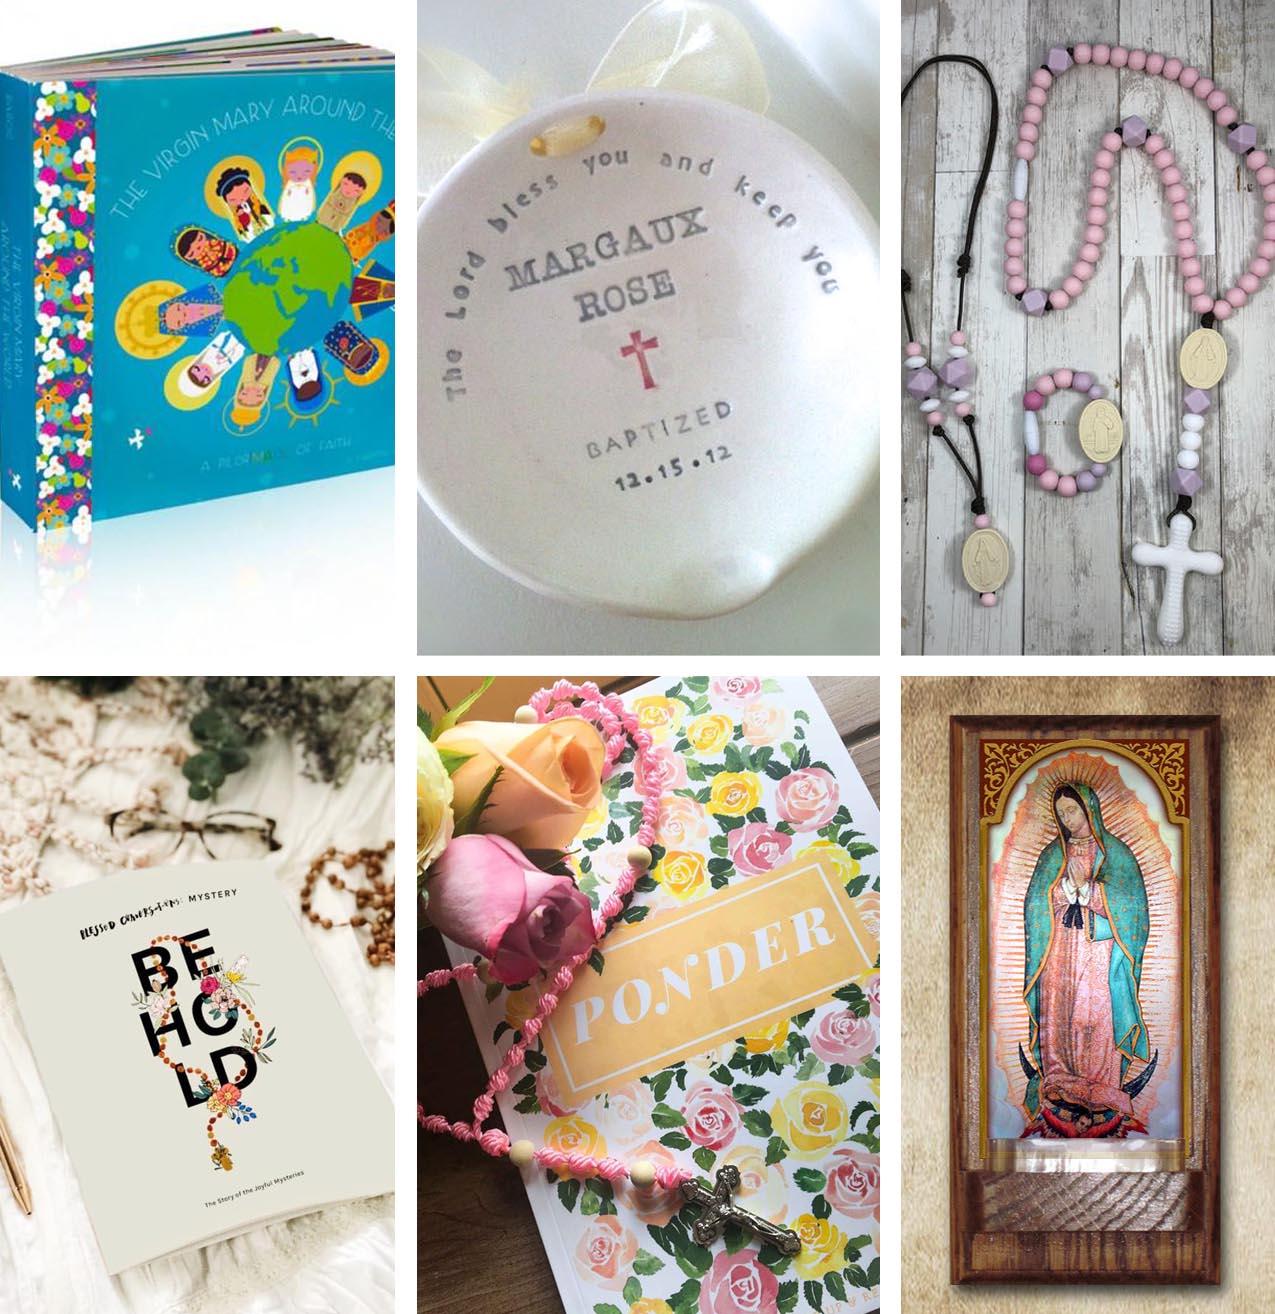 Looking for the perfect baptism gift? From board books to chewable rosaries, this post has it all!